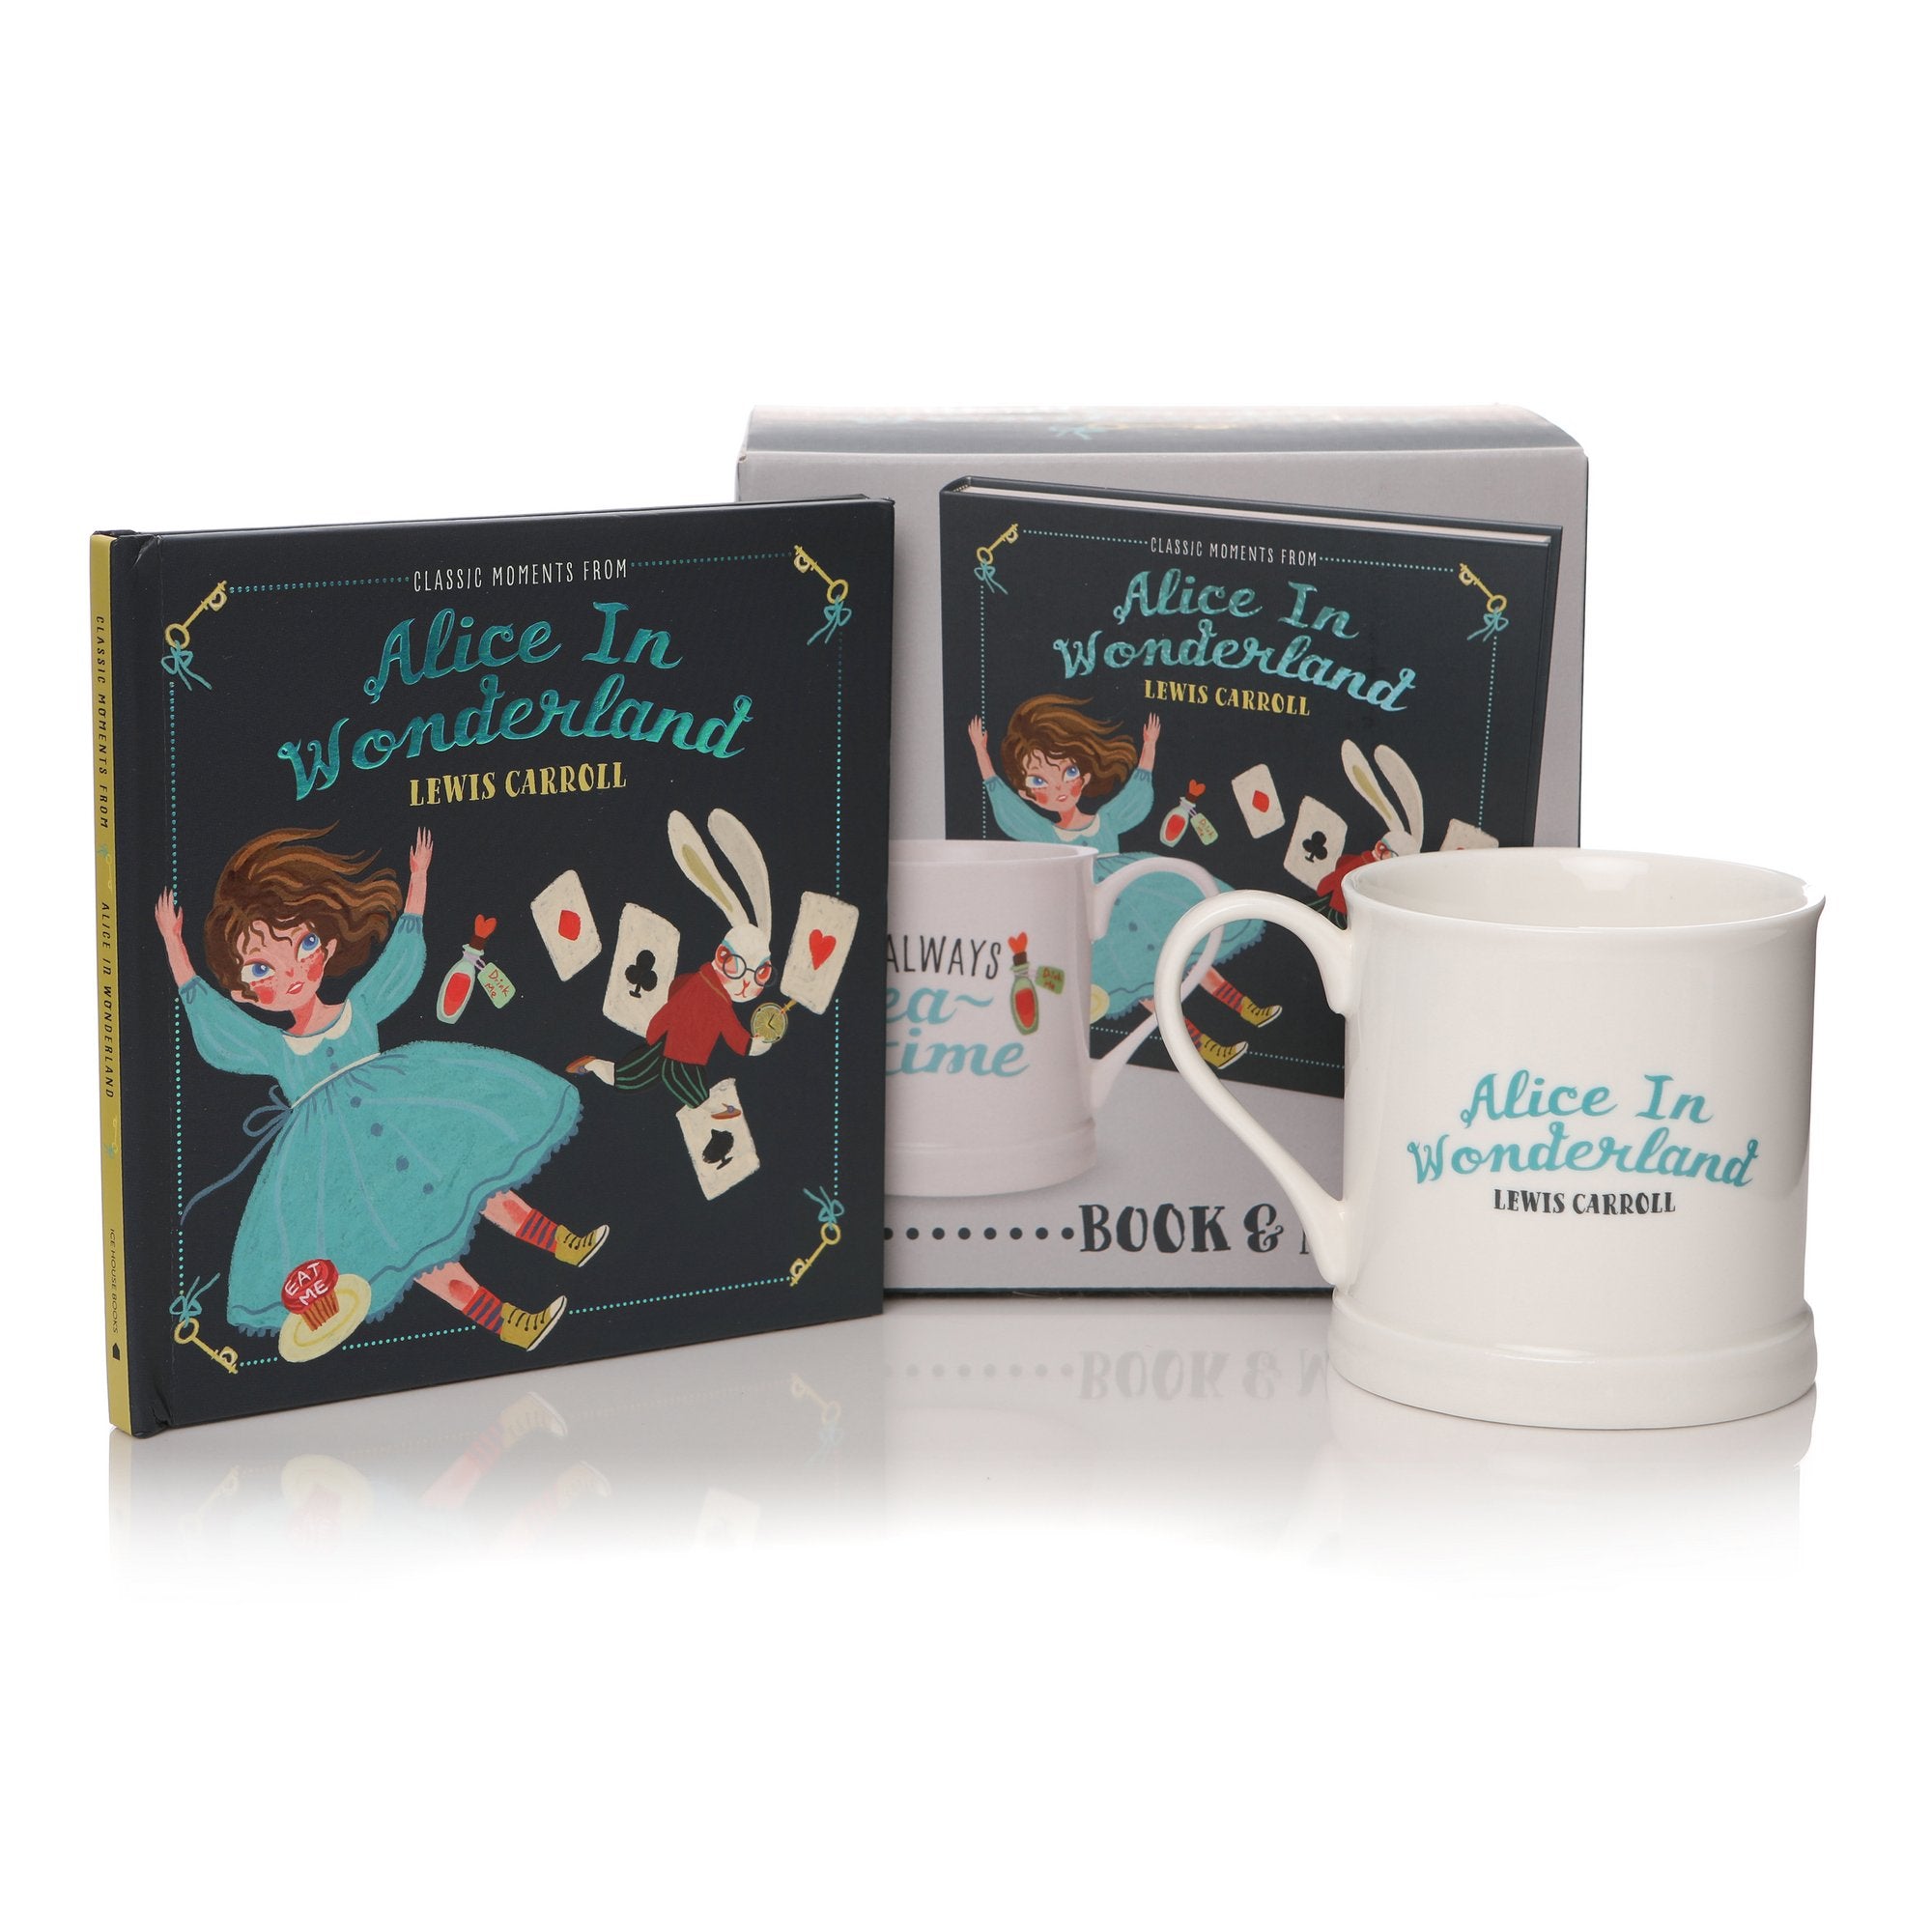 Classic Moments From Alice in Wonderland Book & Mug Gift Set